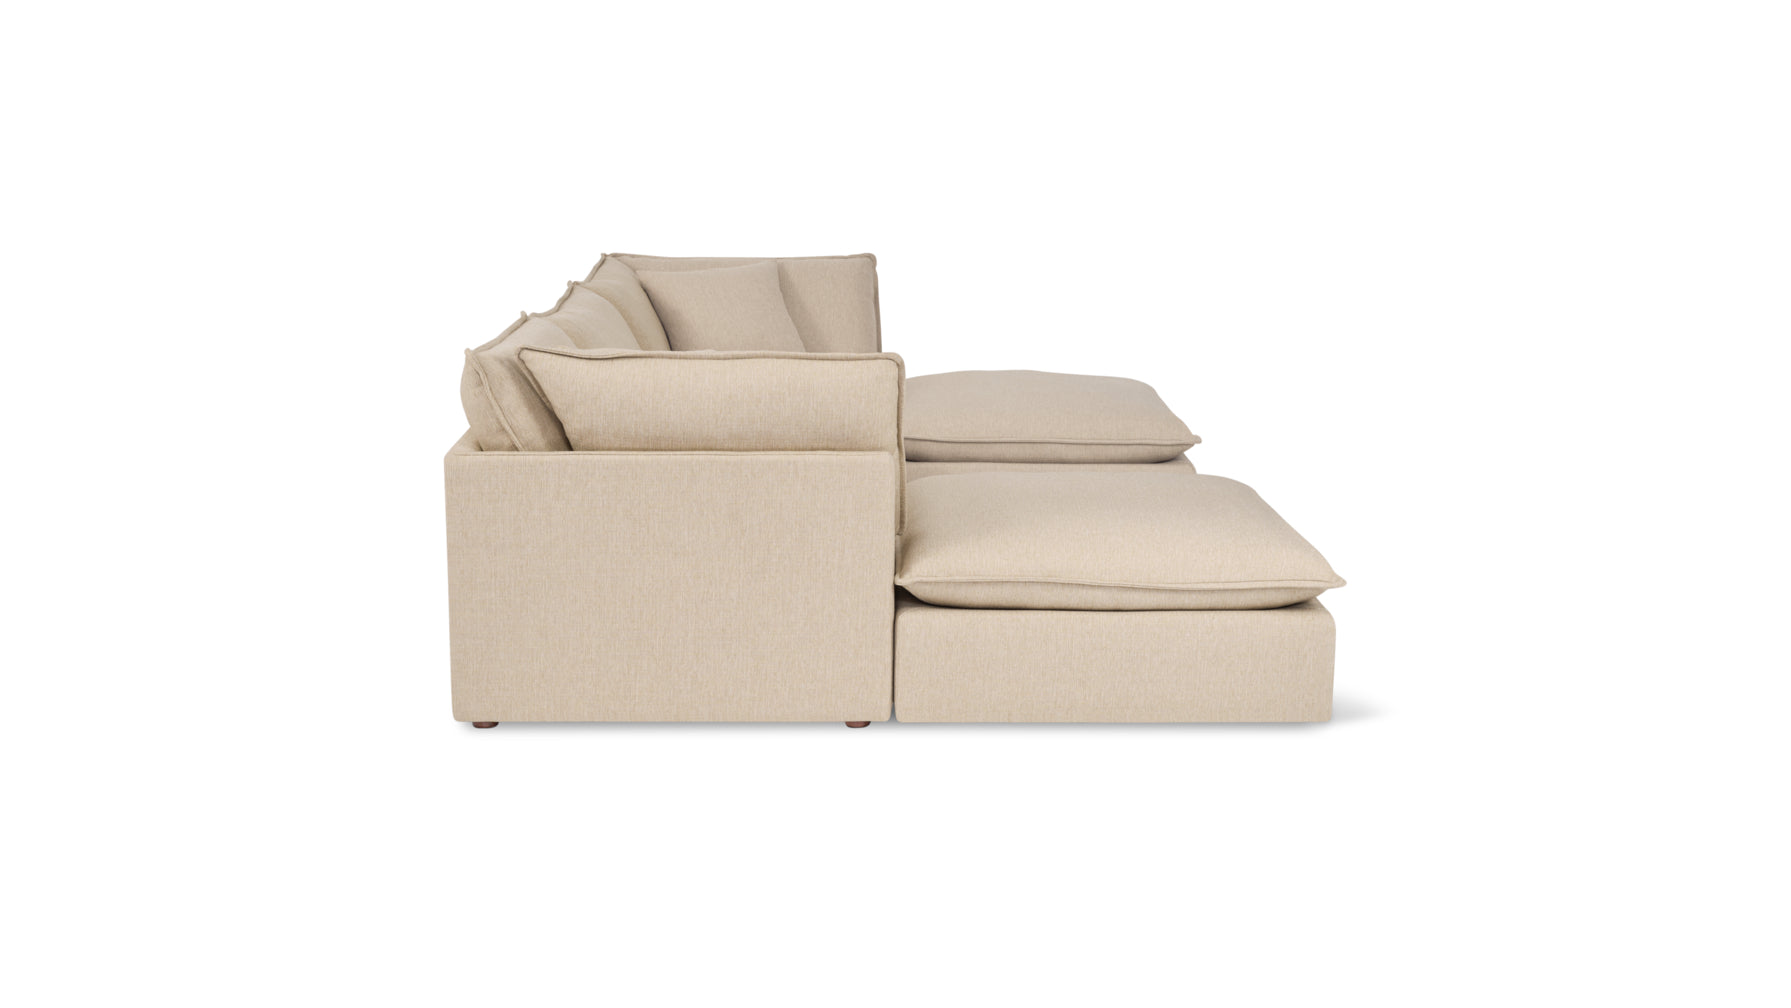 Chill Time 5-Piece Modular U-Shaped Sectional, Biscuit - Image 3